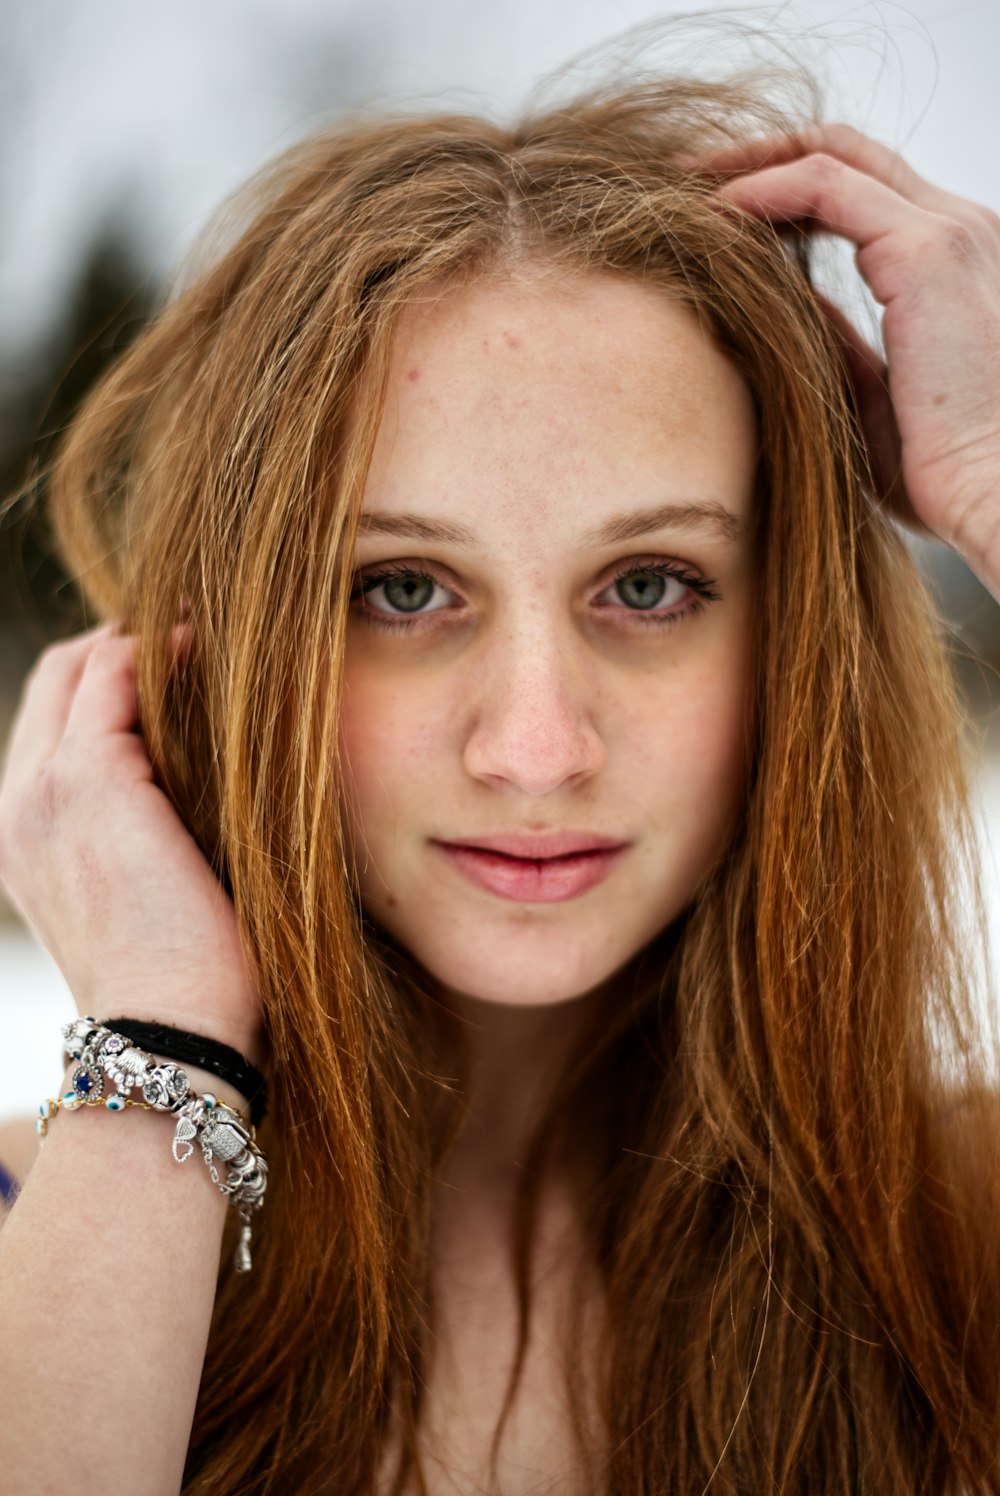 a woman with long red hair wearing a bracelet